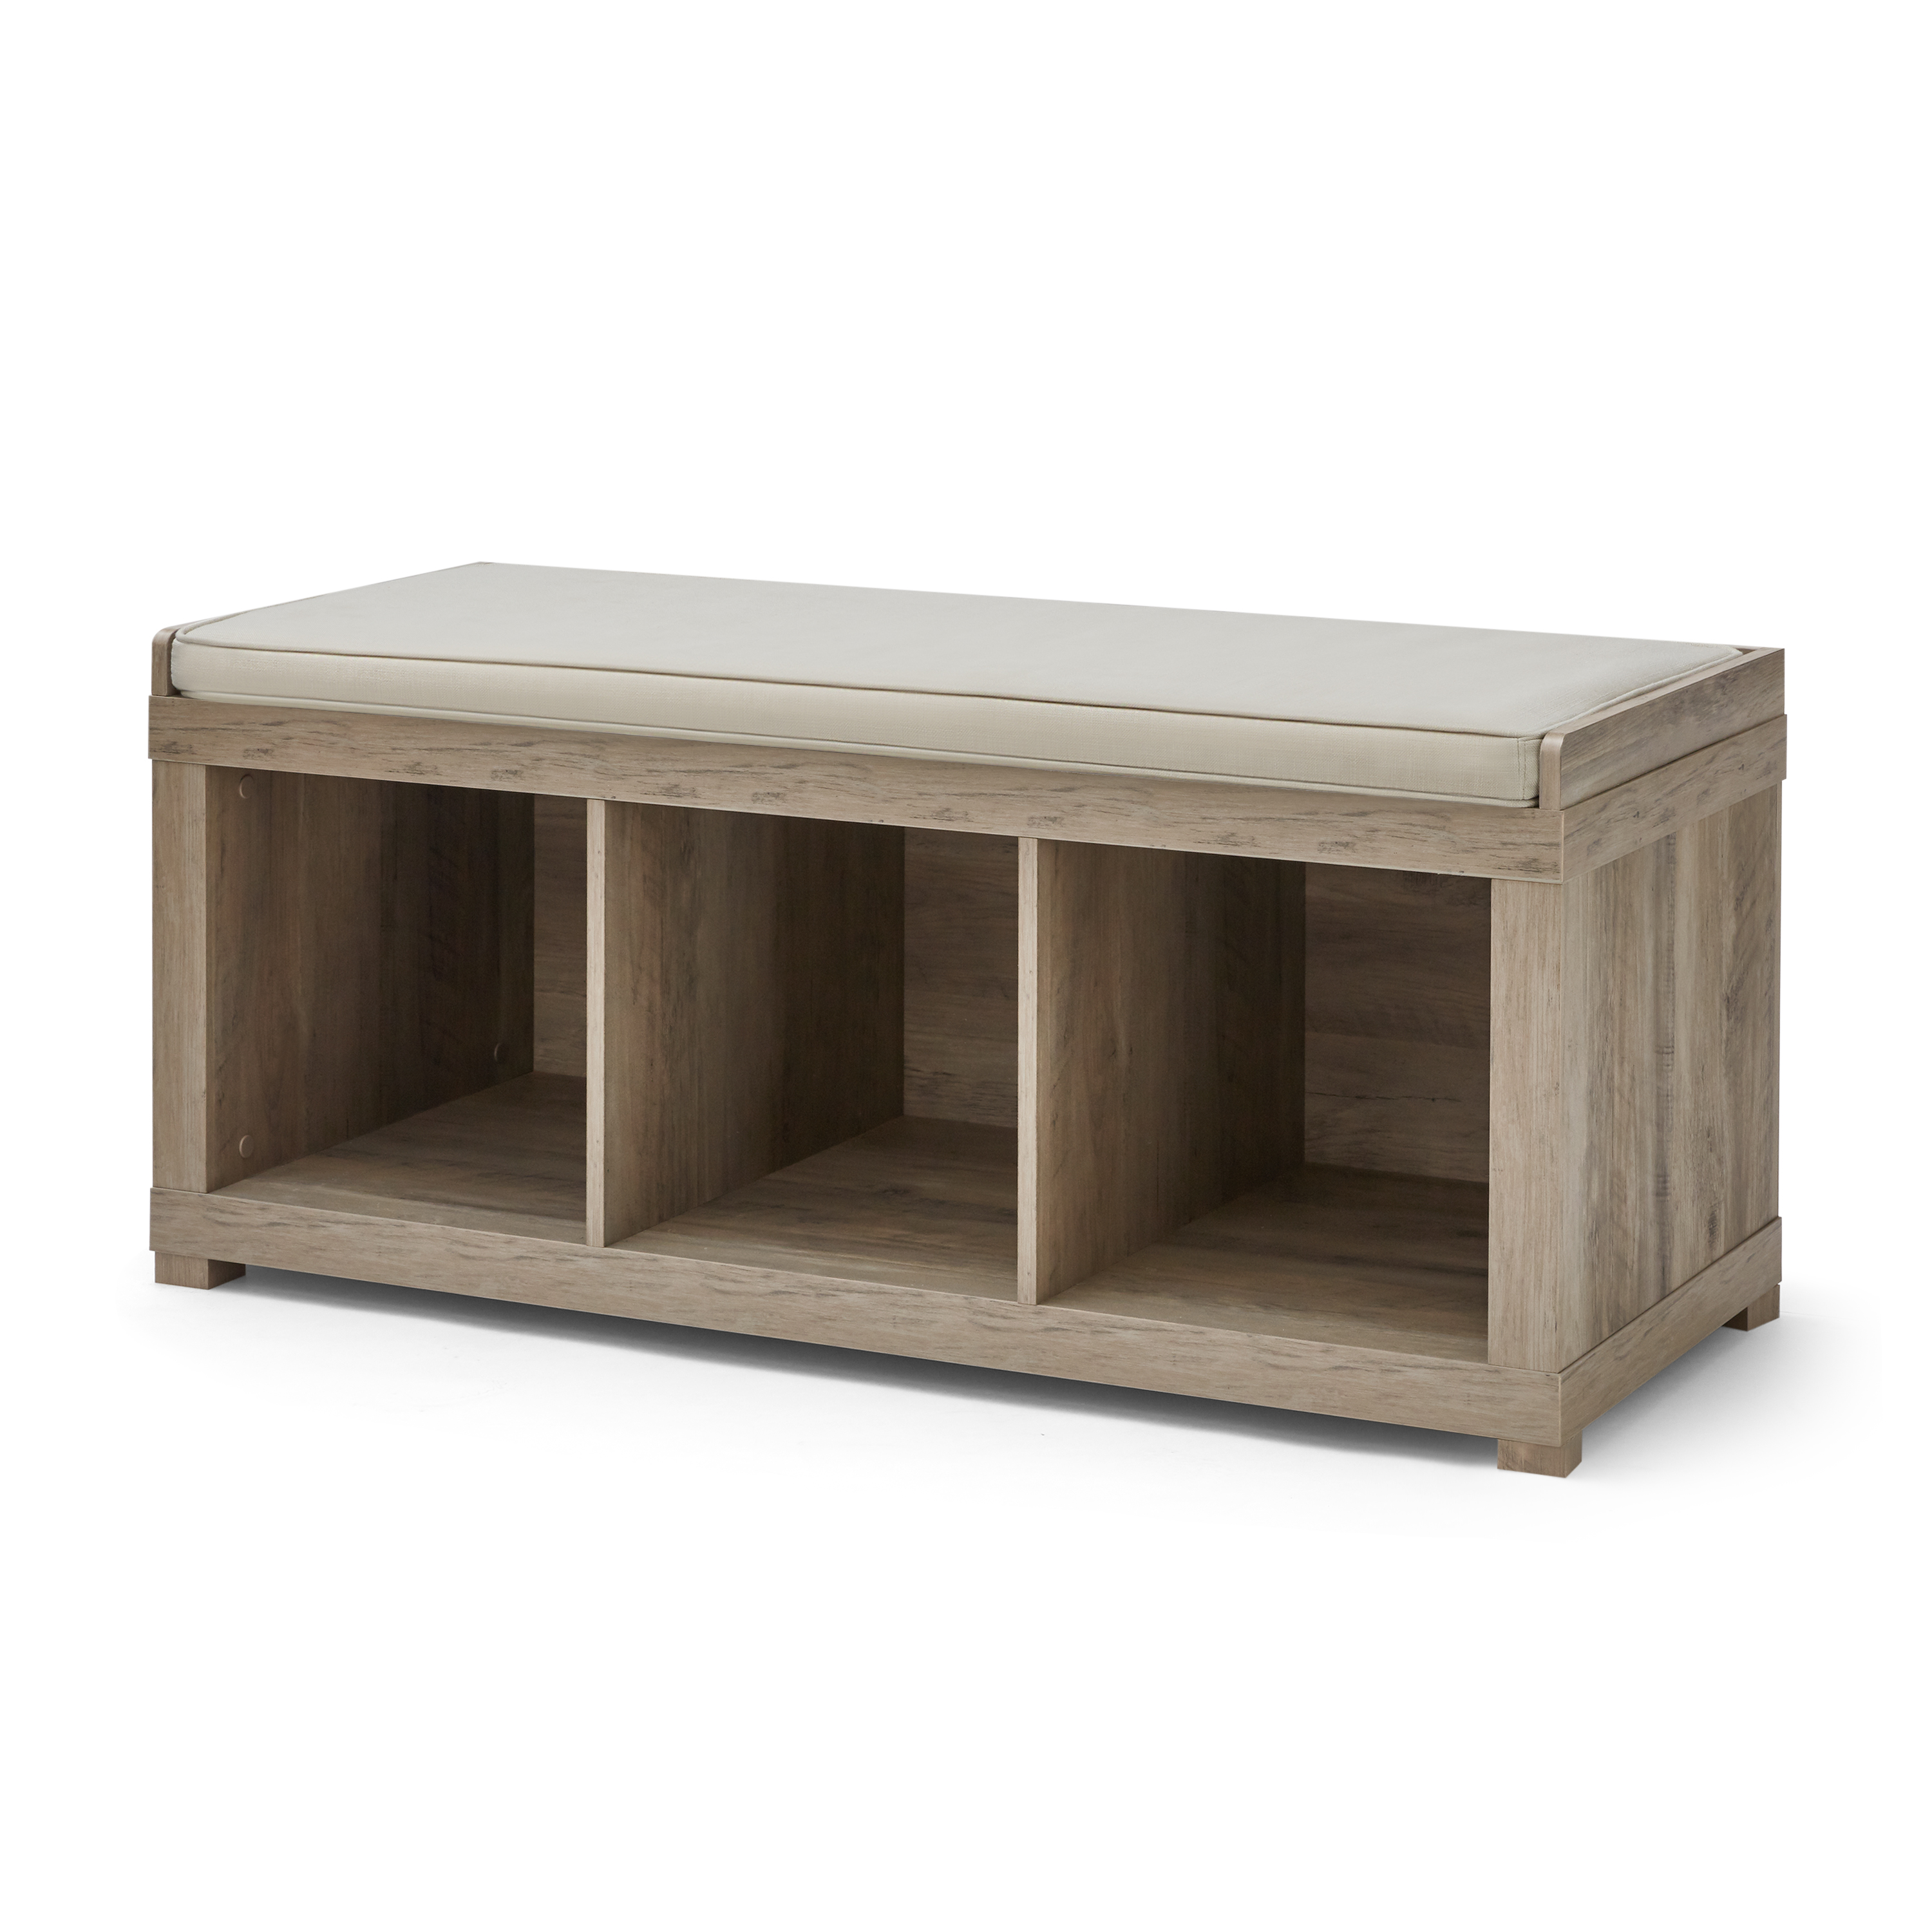 Better Homes & Gardens 3-Cube Shoe Storage Bench, Rustic Gray - image 2 of 9